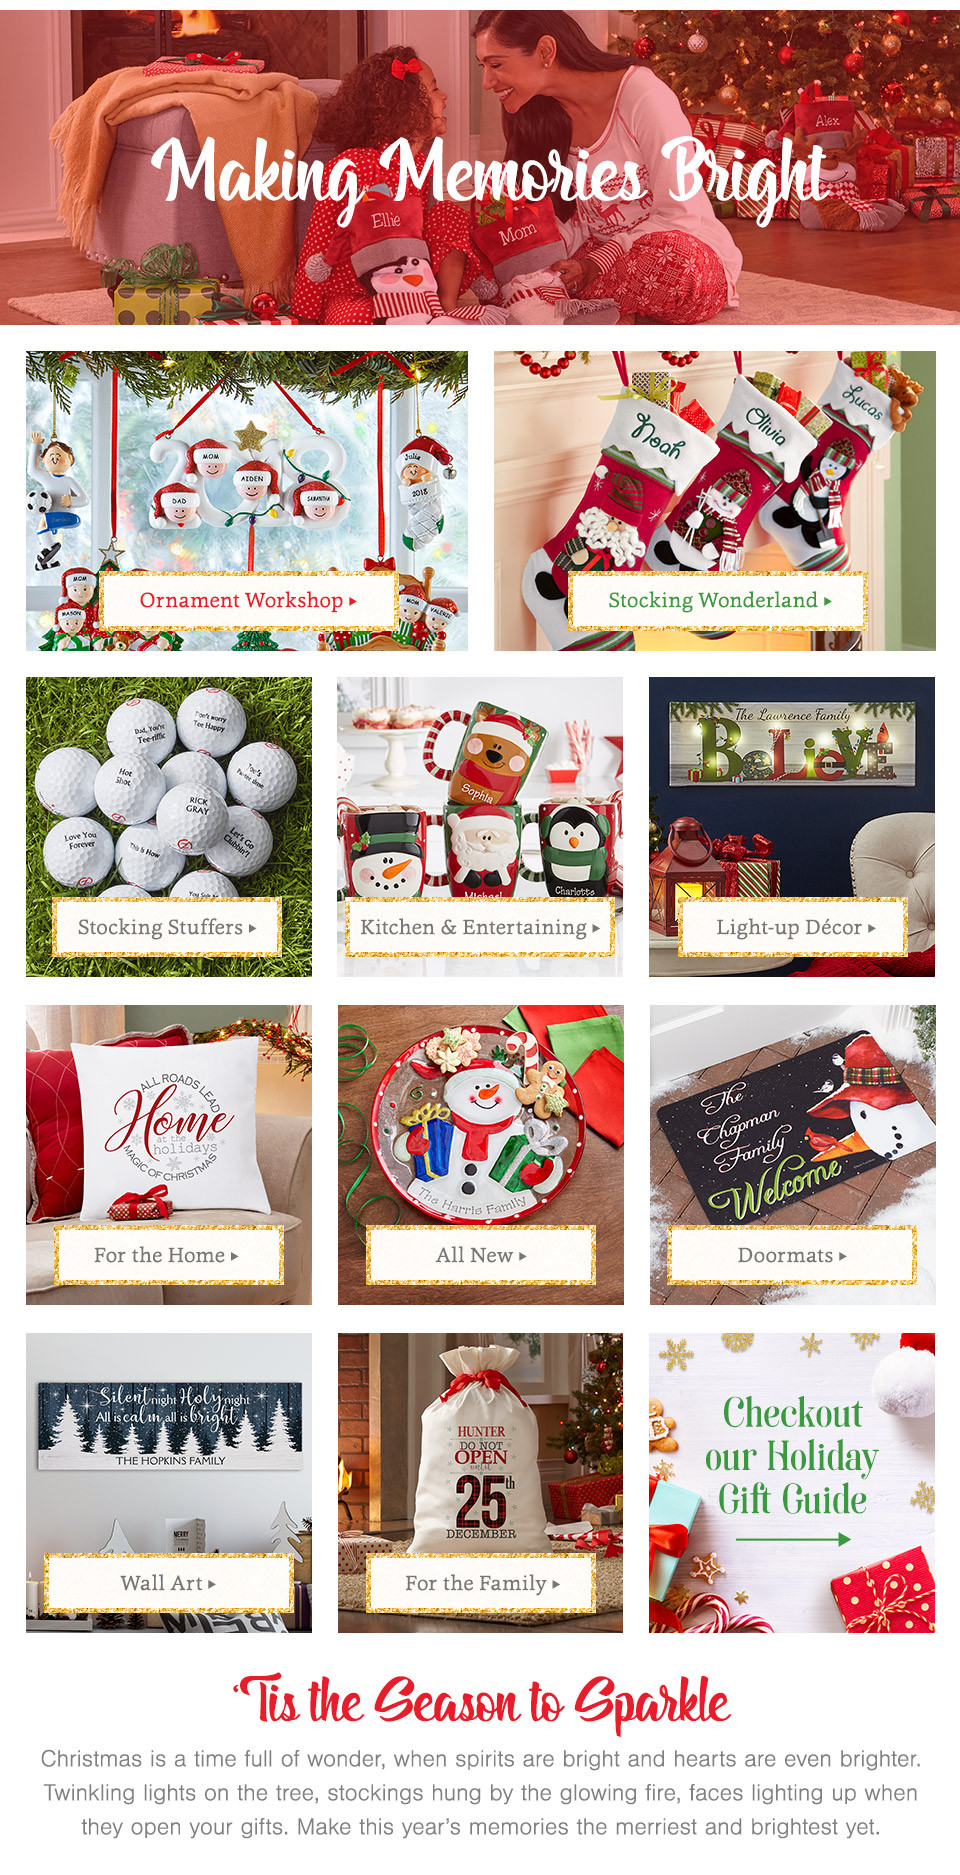 Personalized Christmas Gift Ideas
 2019 Personalized Christmas Gifts